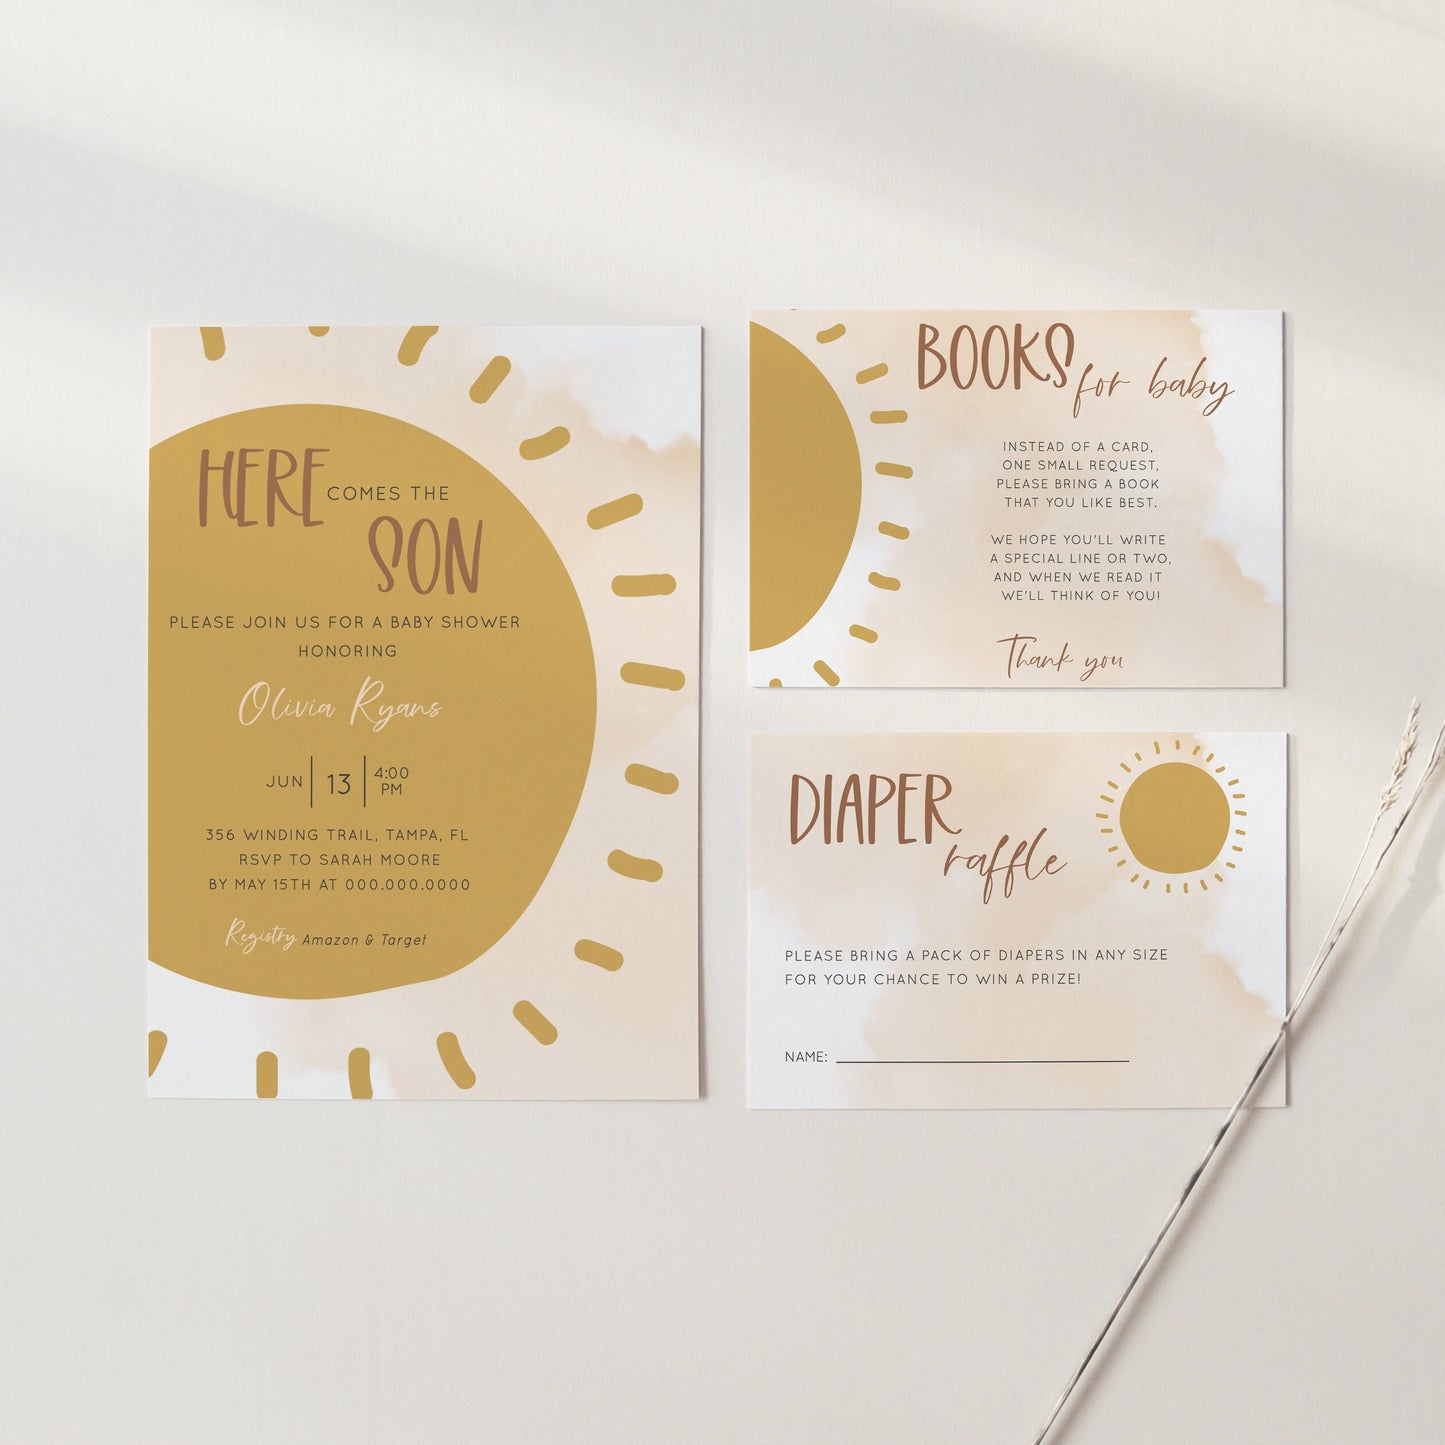 Editable Here Comes the Son Baby Shower Invitation Set Boho Sunshine Shower Invite Baby Shower Invitation Bundle Template